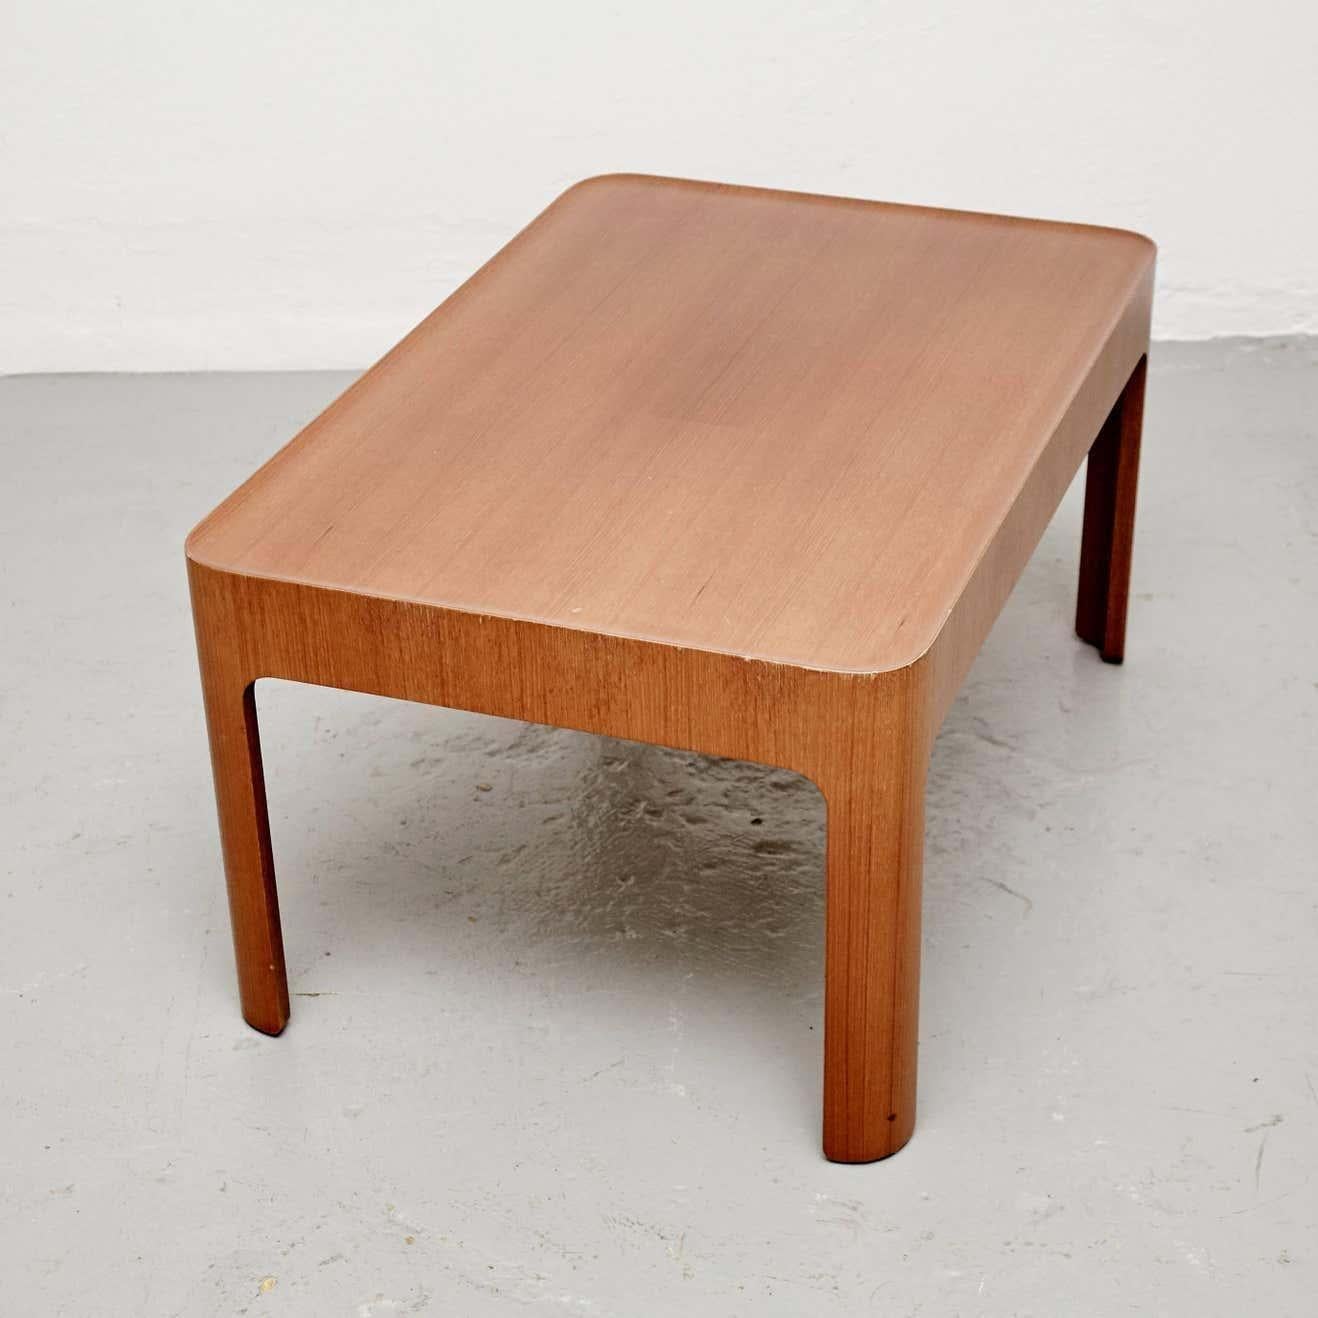 Isamu Kenmochi Mid-Century Modern Wood Coffee Table, Tendo, 1967 In Good Condition For Sale In Barcelona, Barcelona